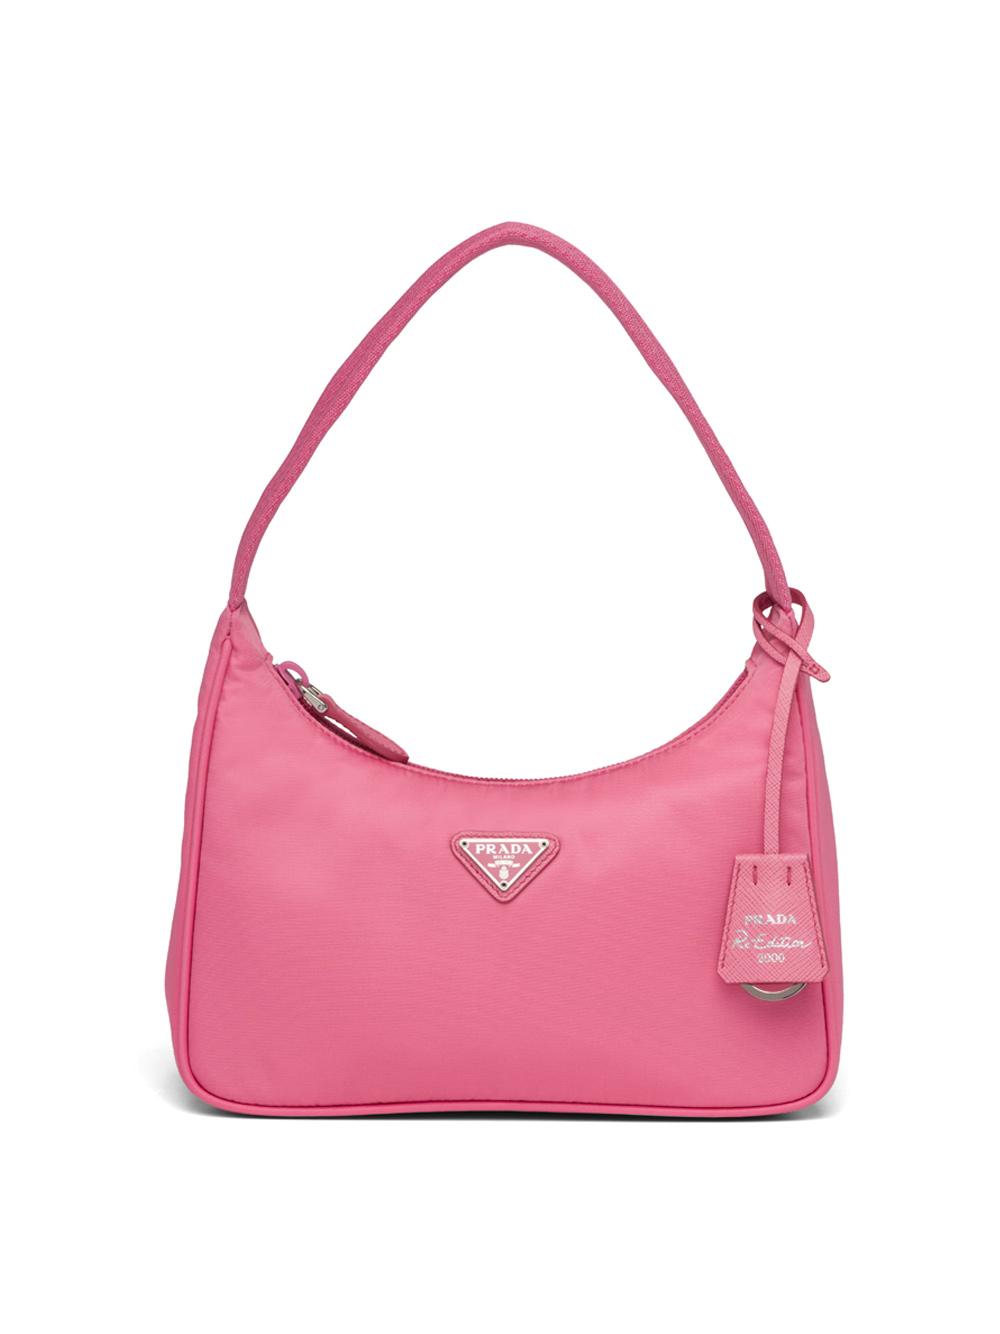 8 Best Prada Bags With Prices